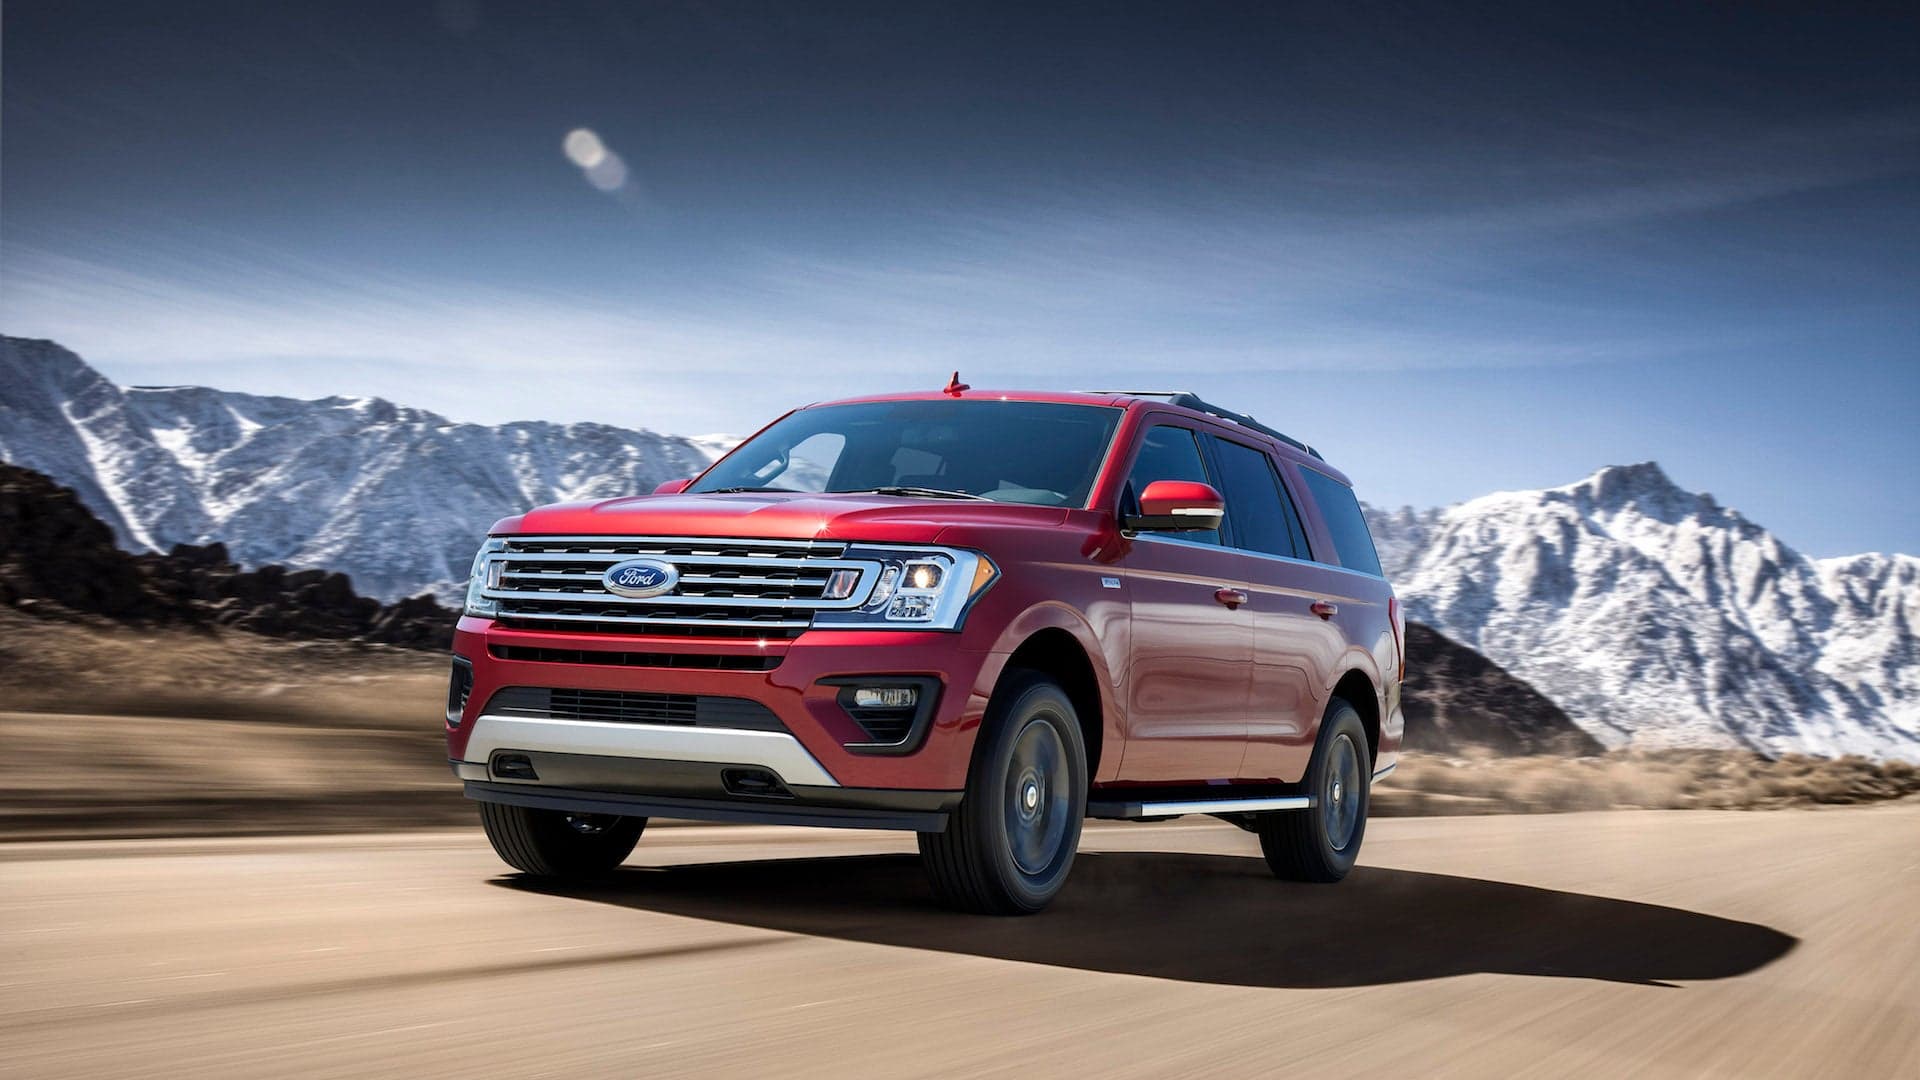 Ford Expedition Is Now the Most Fuel-Efficient Full-Size SUV